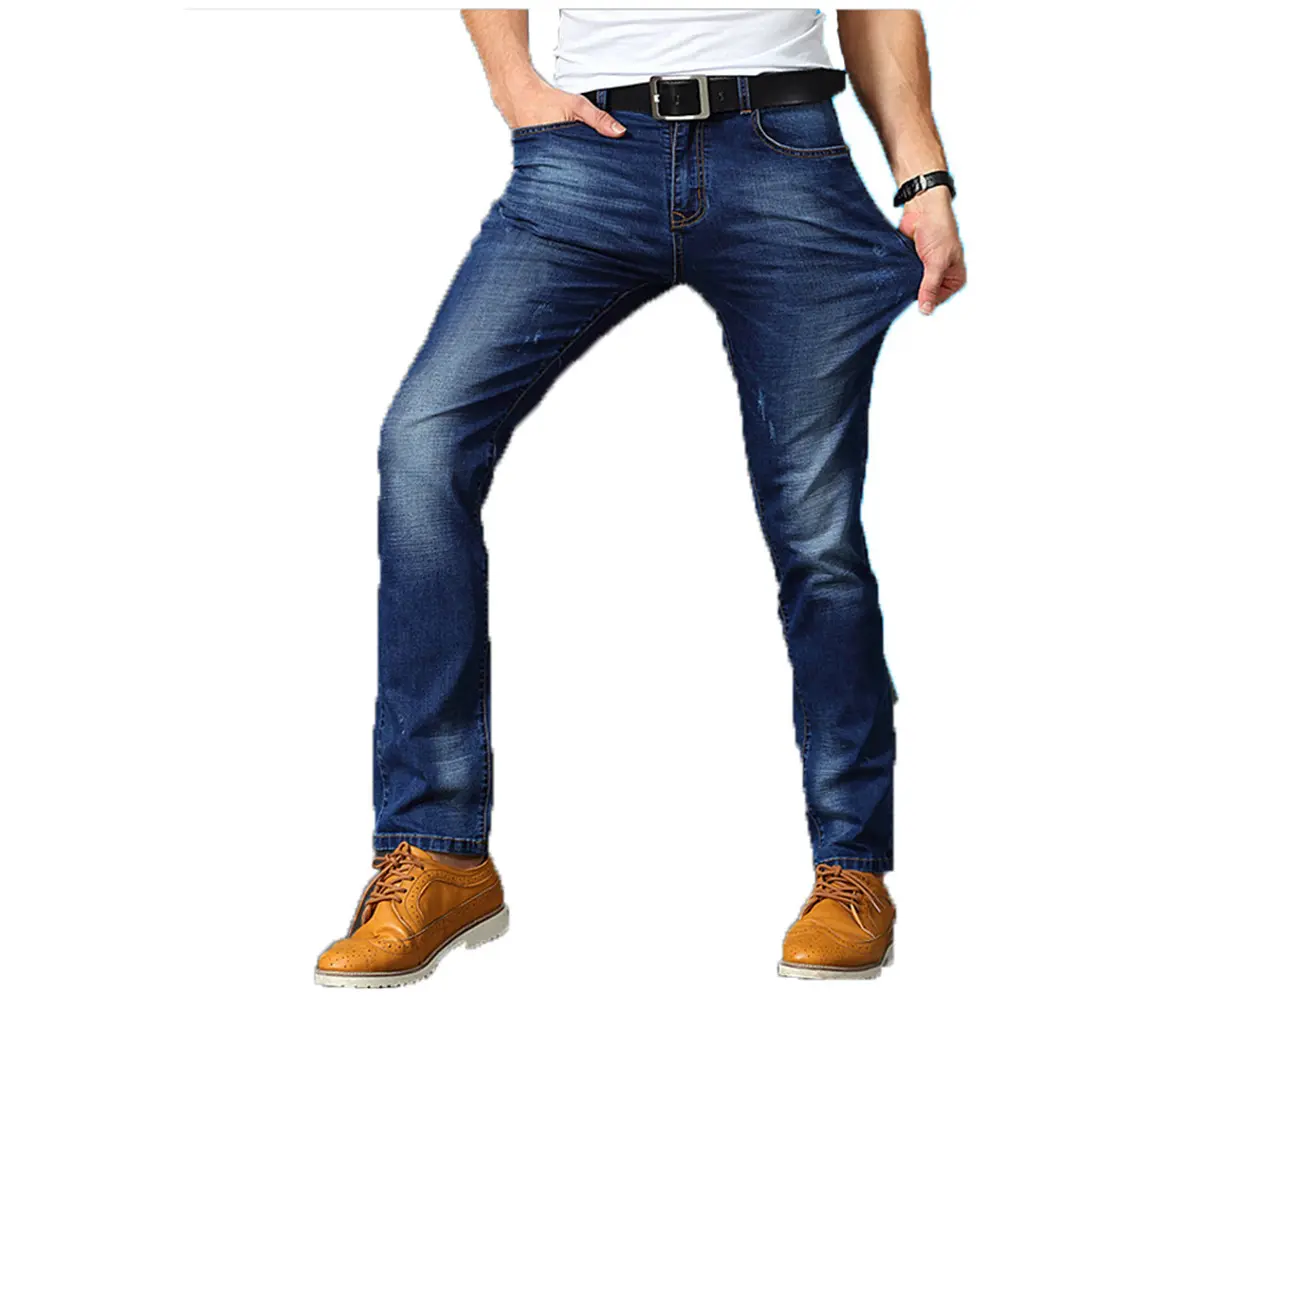 Men Jeans Jeans for Men Distressed Elastic Waist Big and Tall Stretch Men Slim Fit Ripped Denim Jeans pant